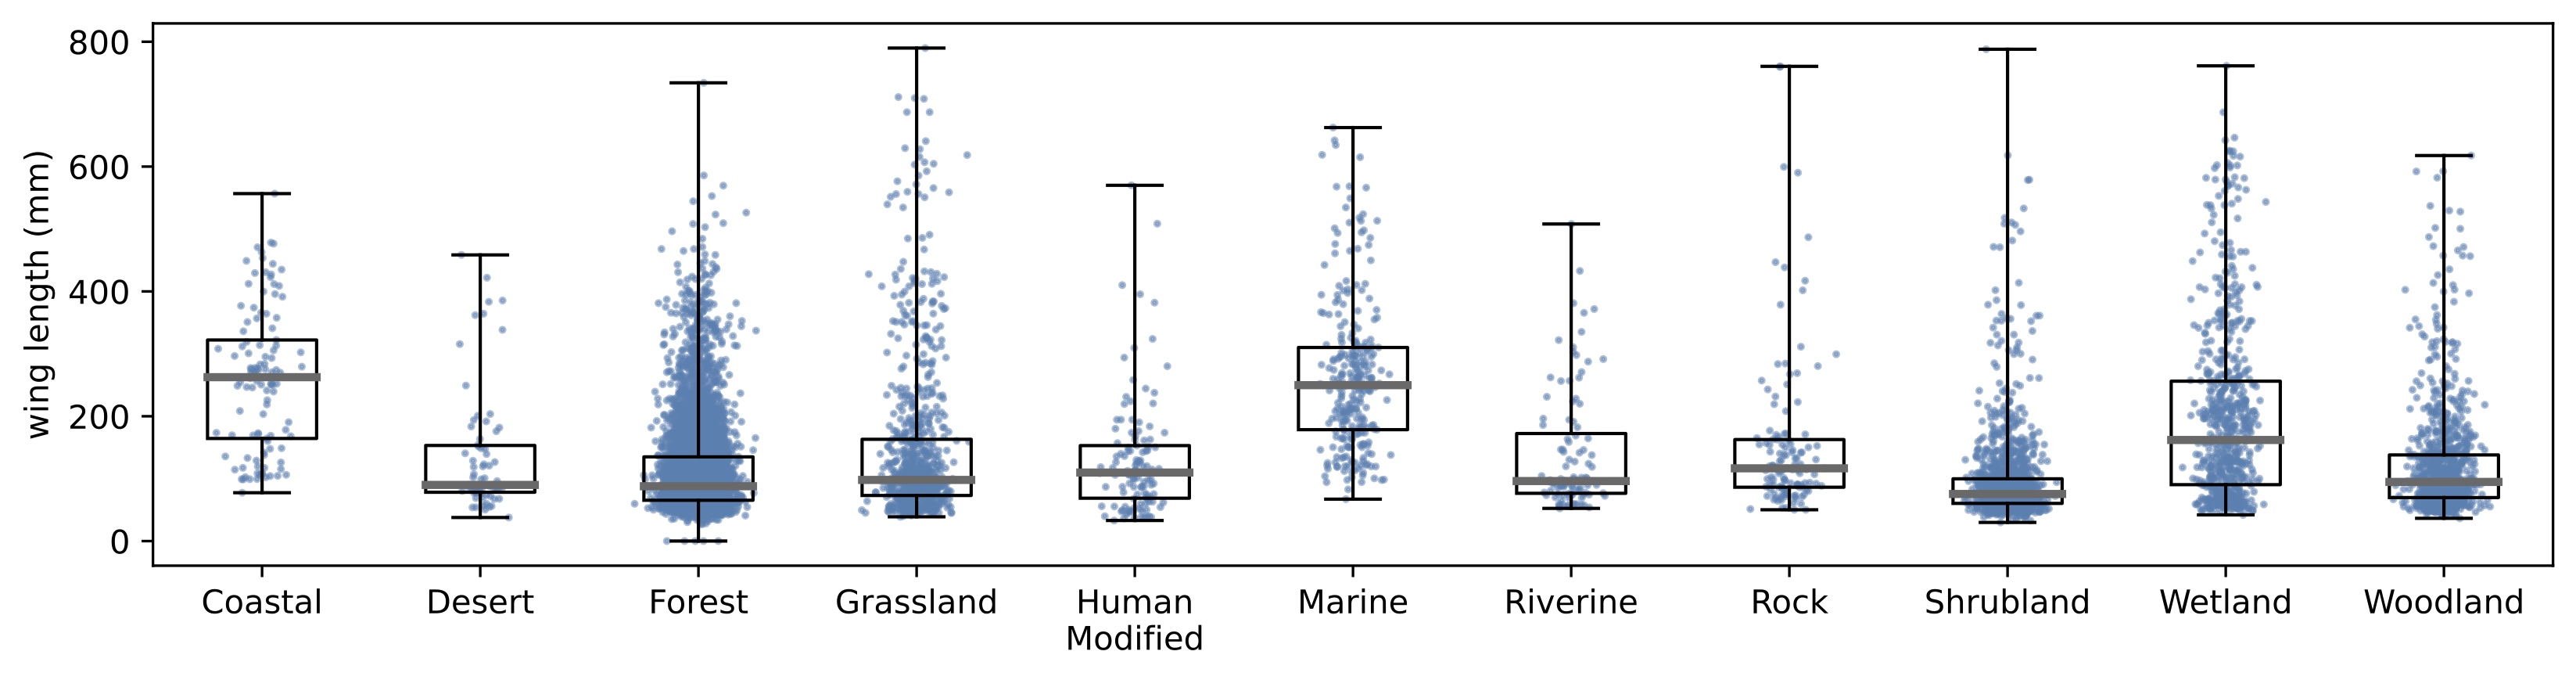 Boxplot of bird wing lengths, separated by environment.